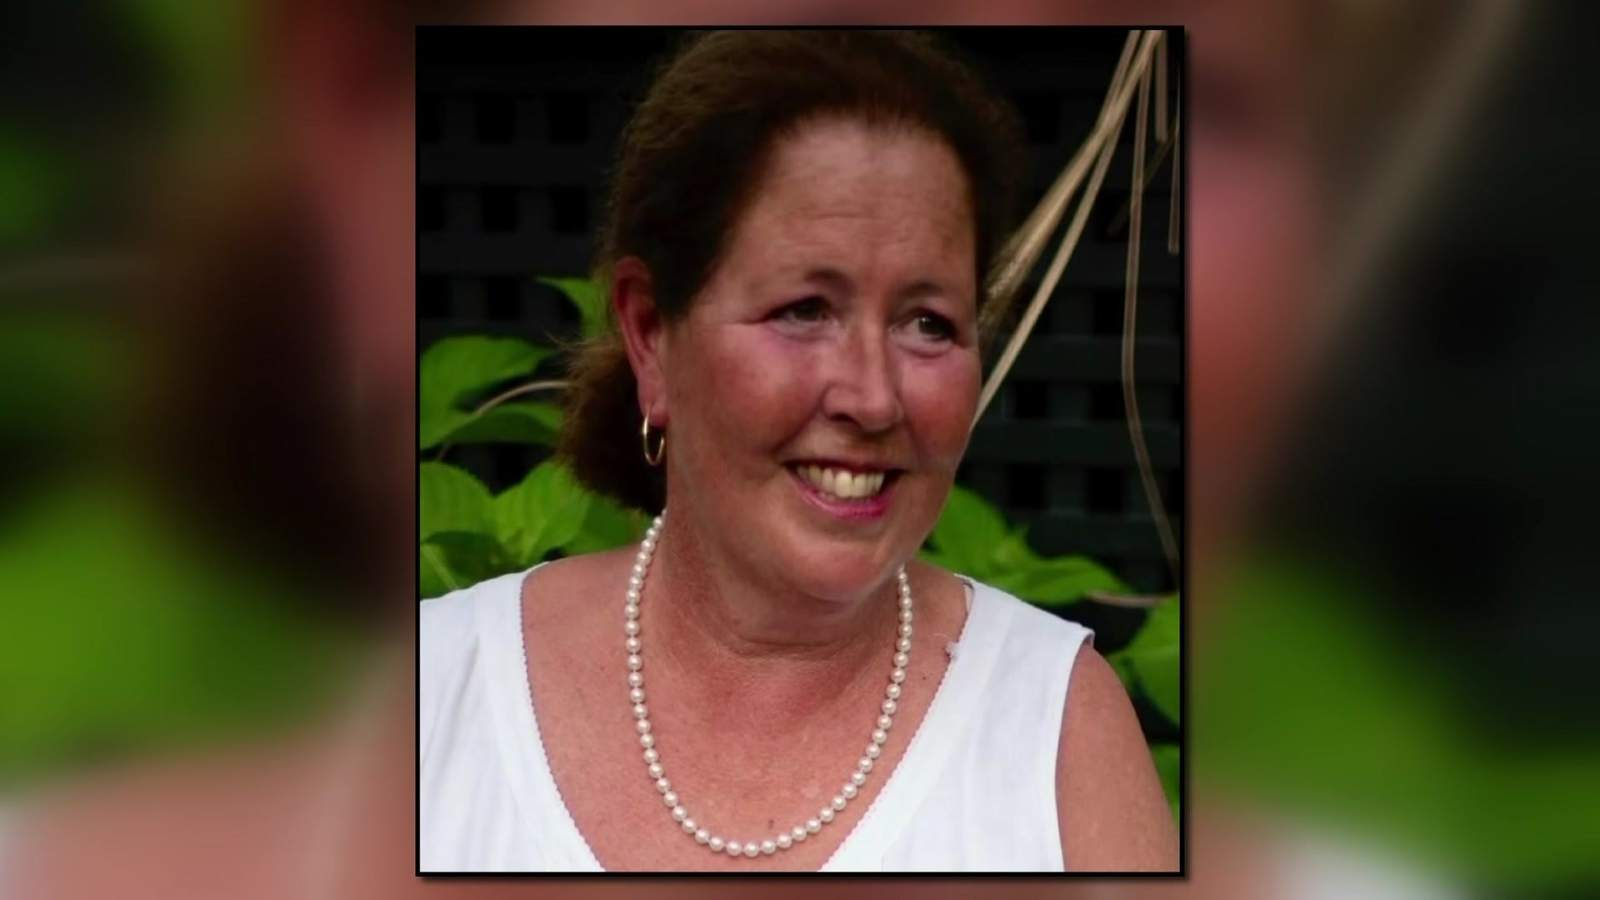 Houston woman missing for more than a week in Massachusetts, officials say